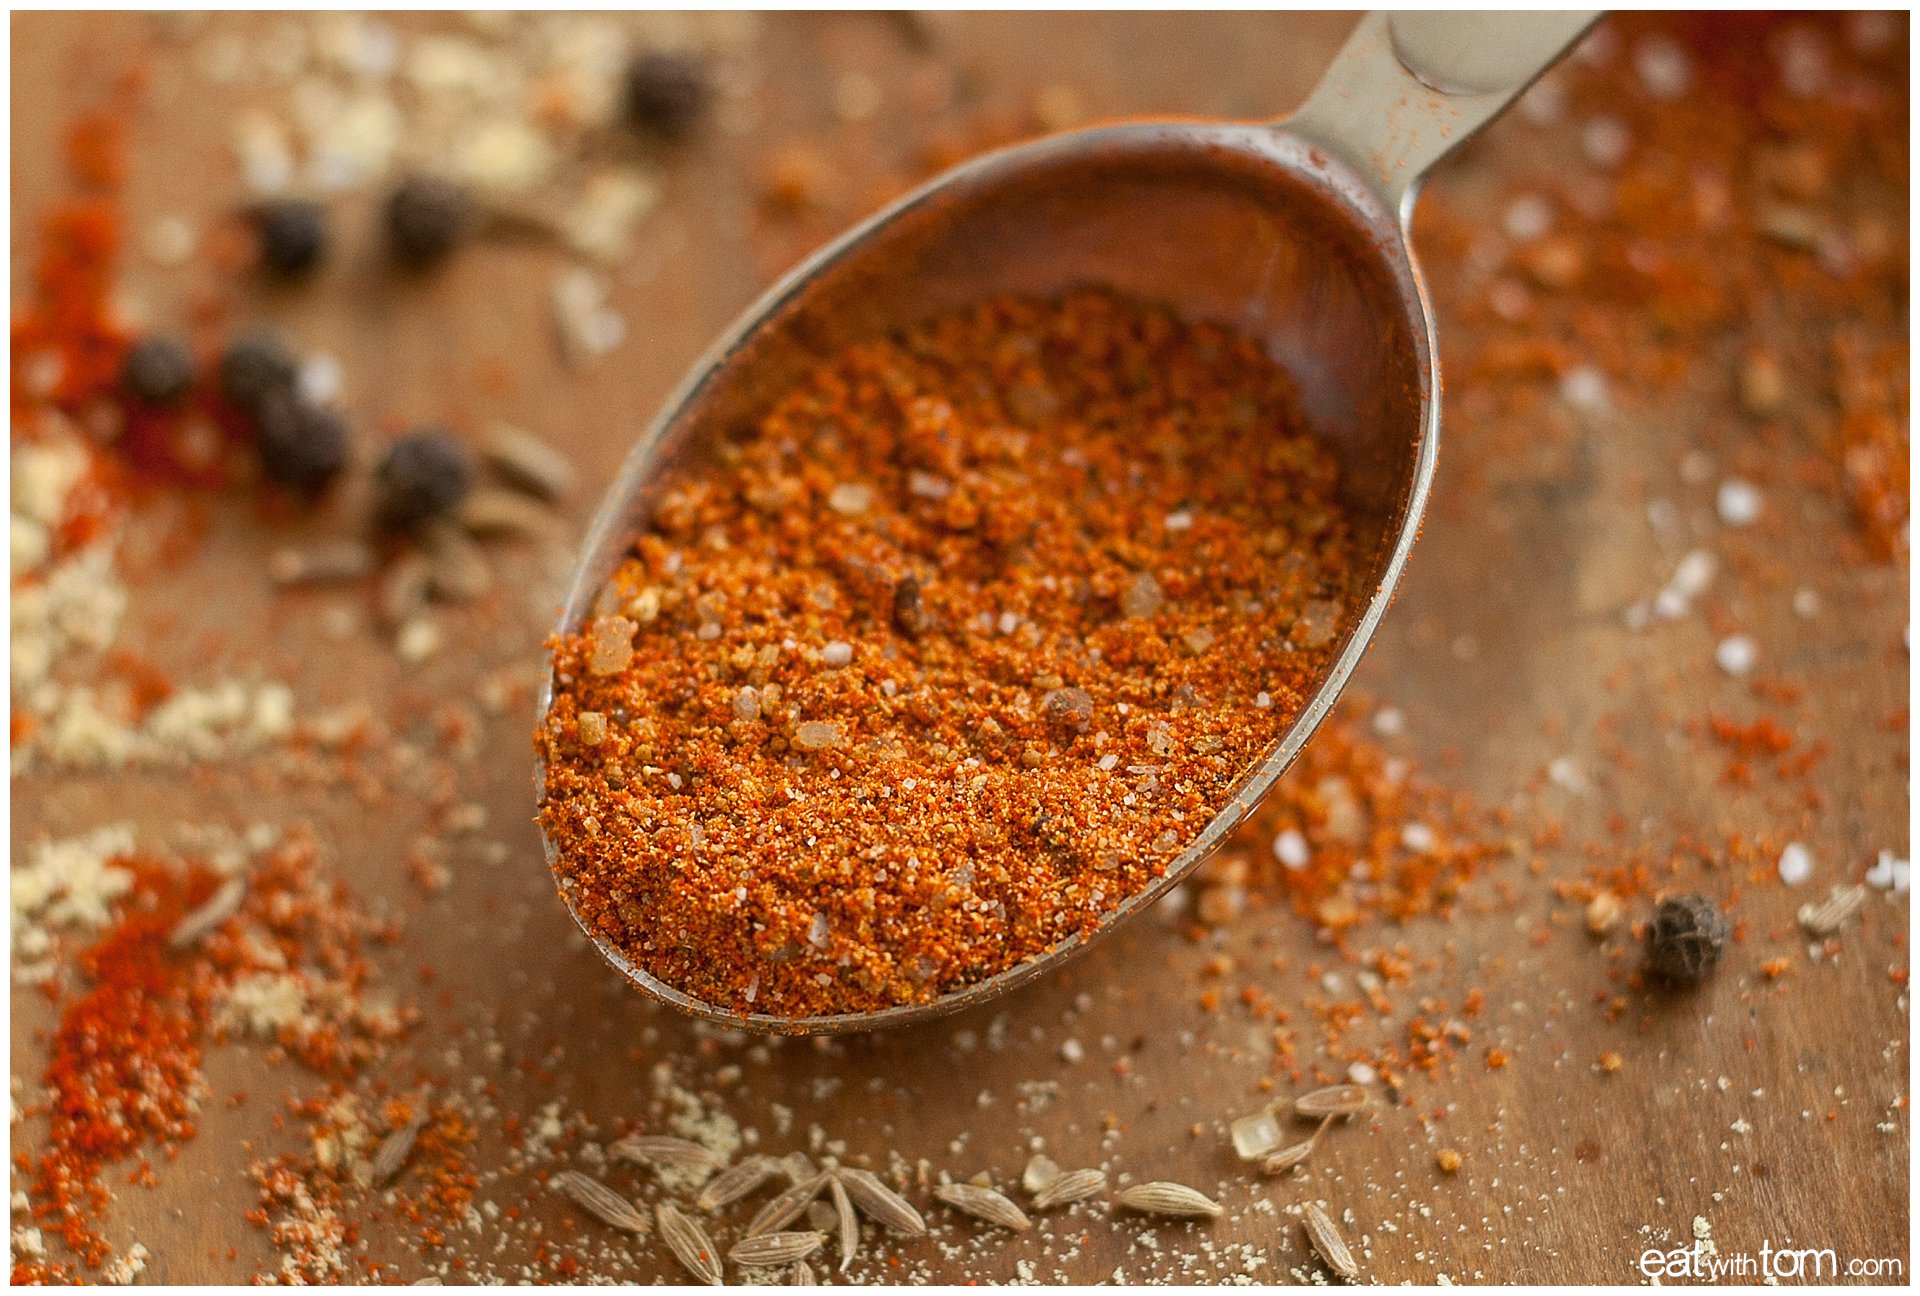 Top rated bbq rub Magic Dust from Peace, Love and Barbeque - Illustrated Recipe by eat with tom